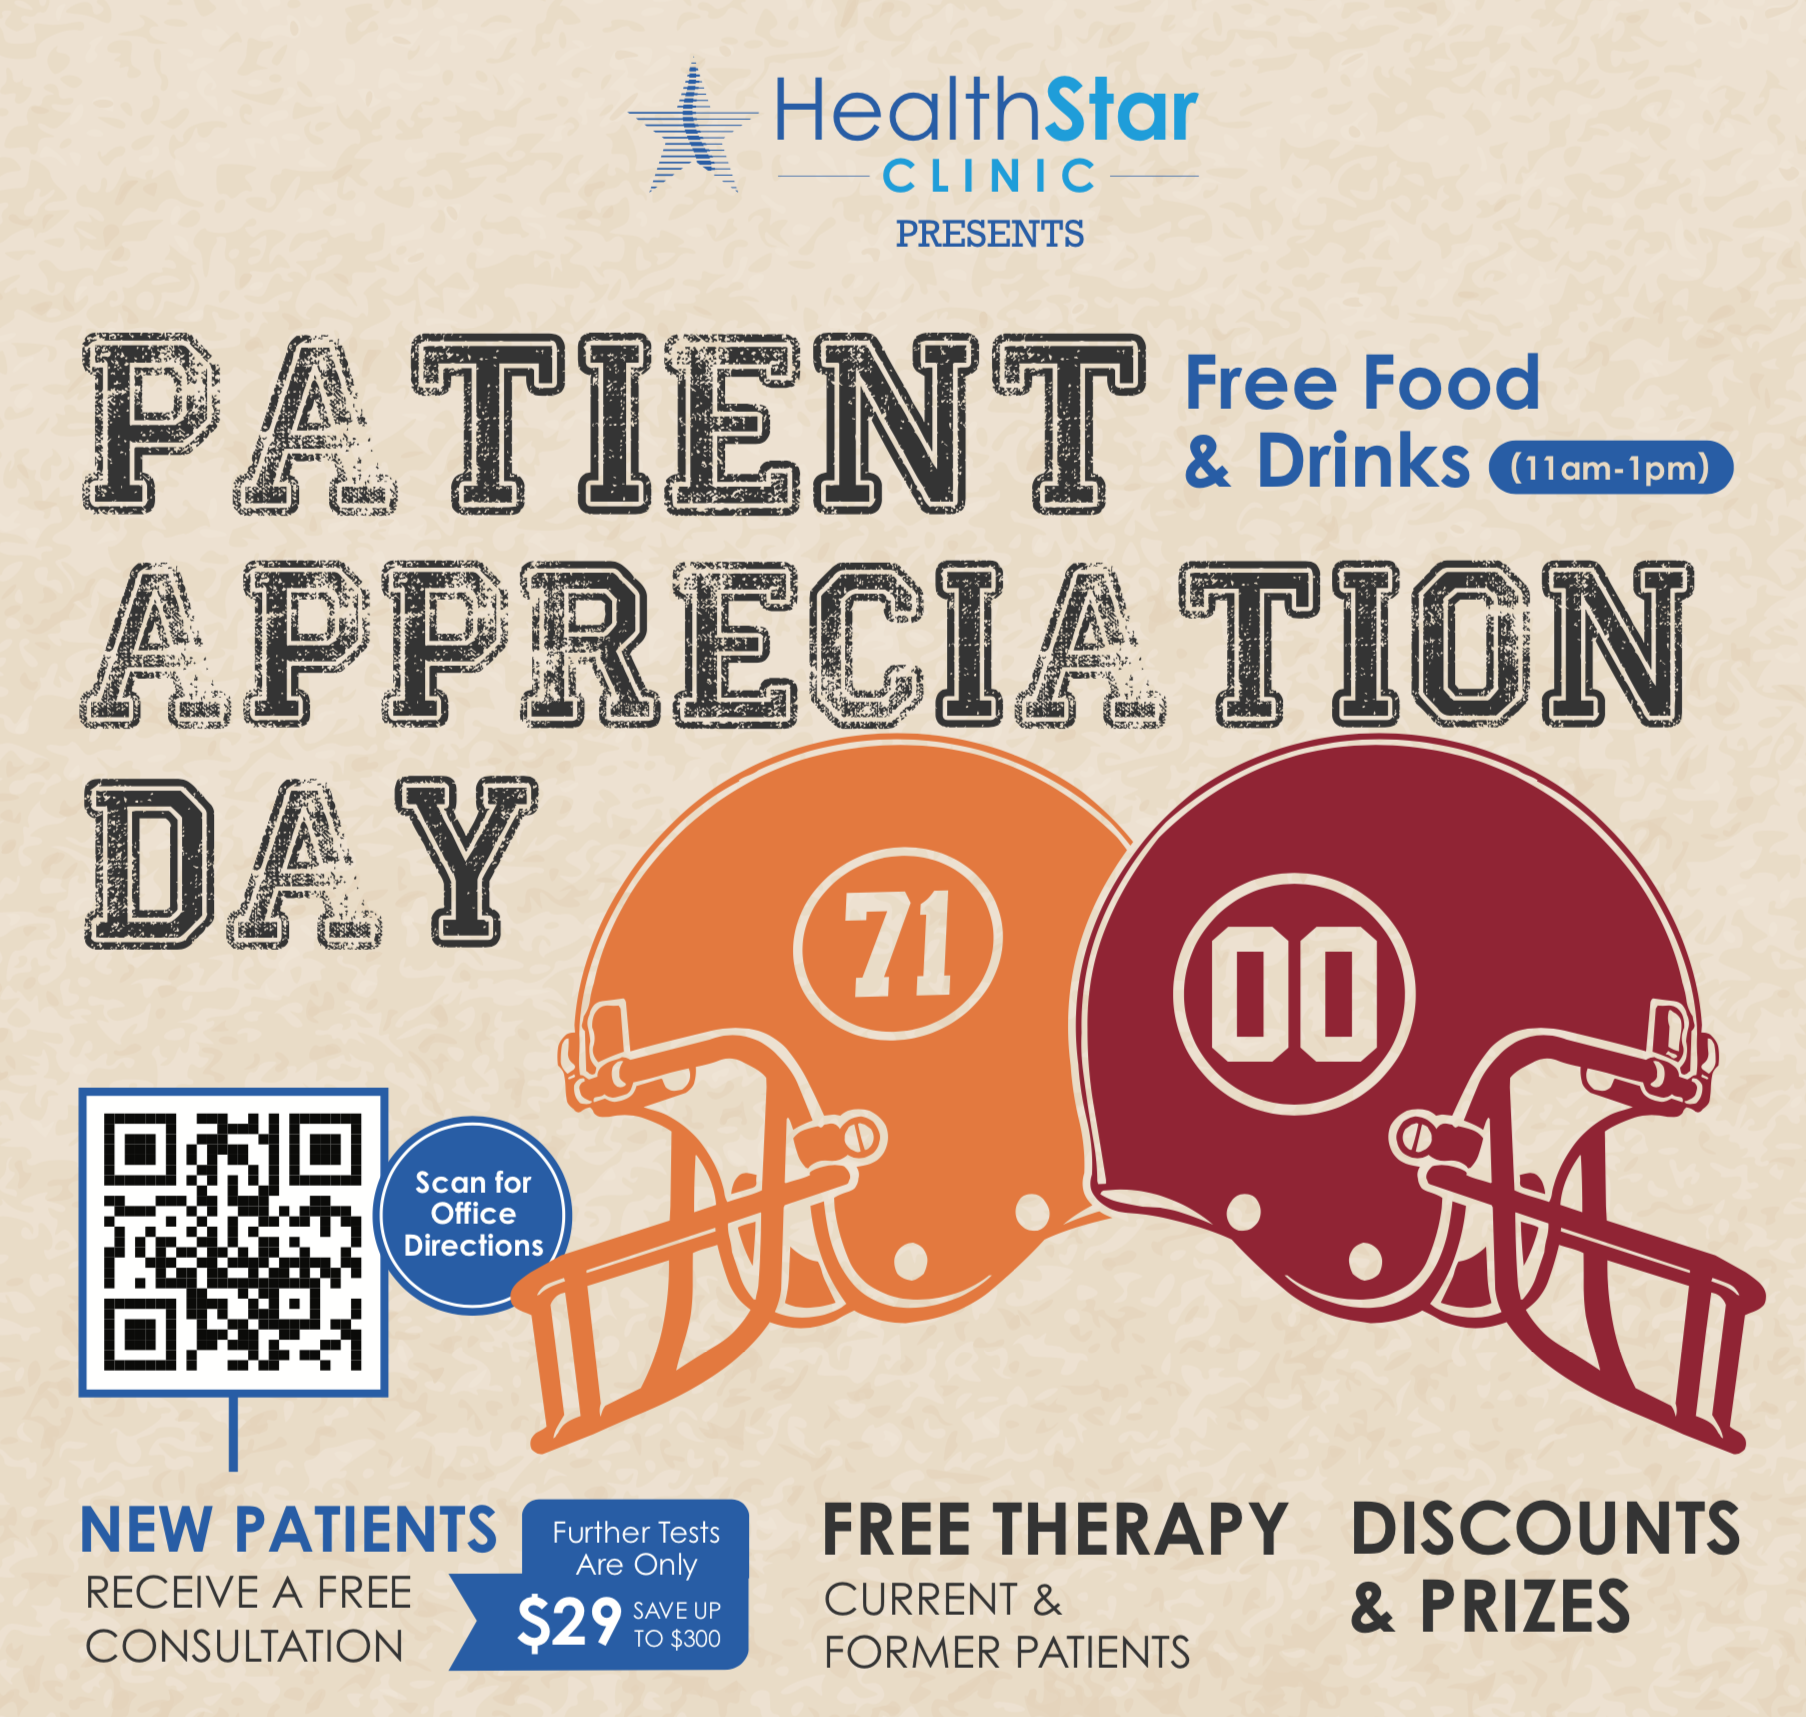 Join us for 2019 HealthStar Patient Appreciation Days!